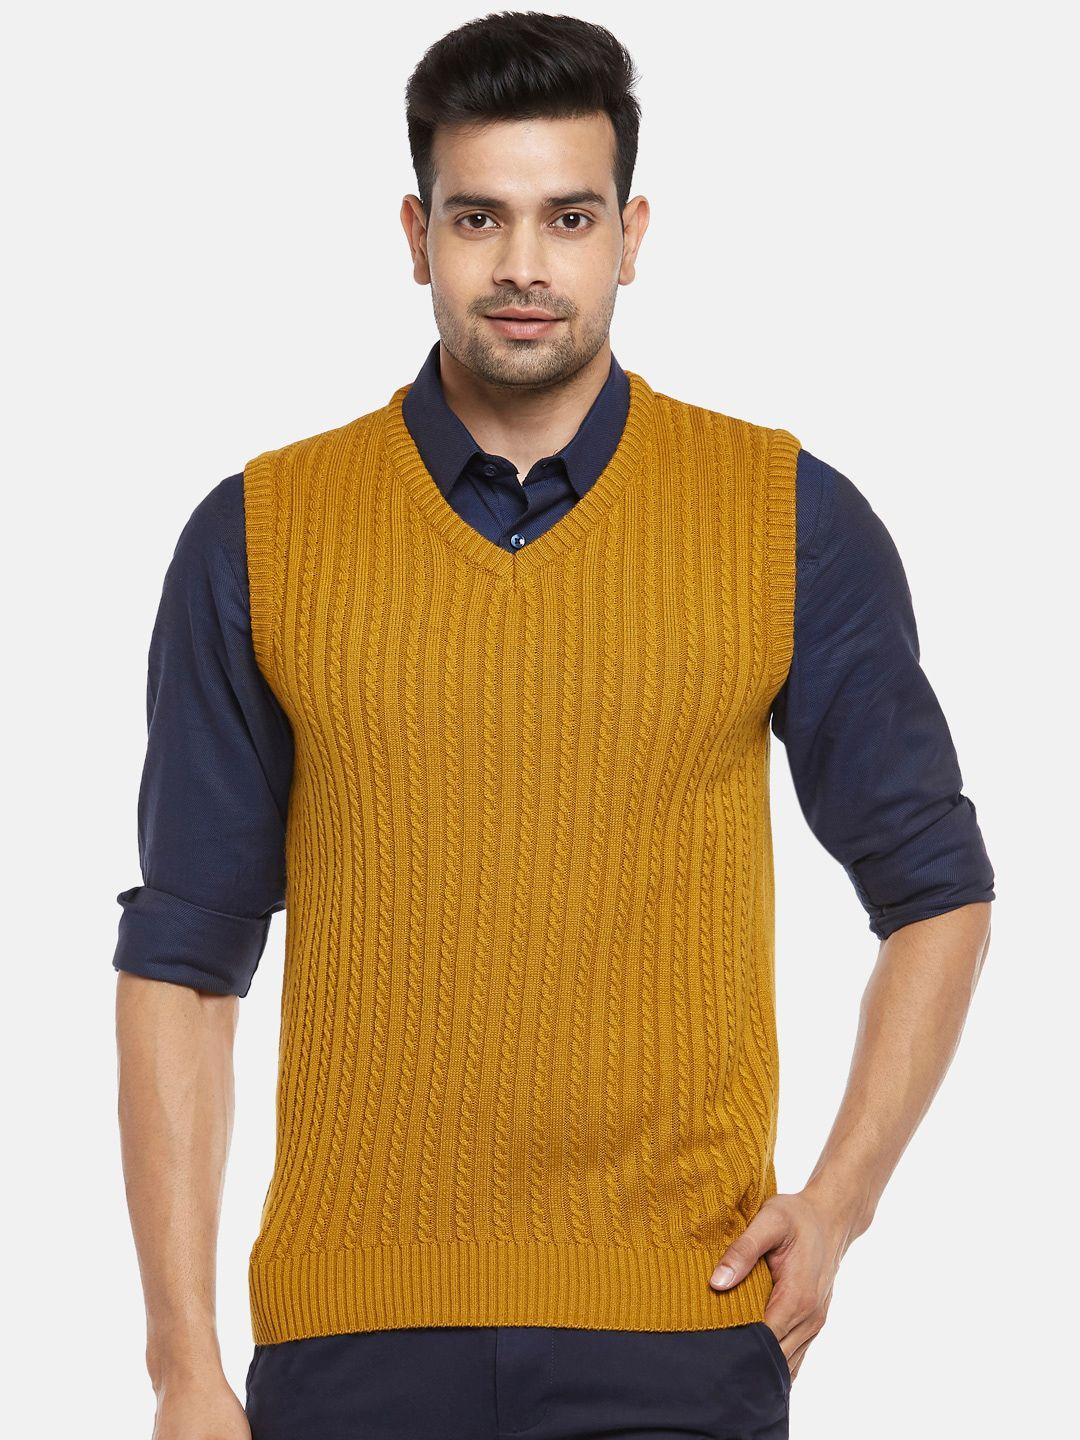 byford by pantaloons men mustard yellow cable knit pure acrylic sweater vest